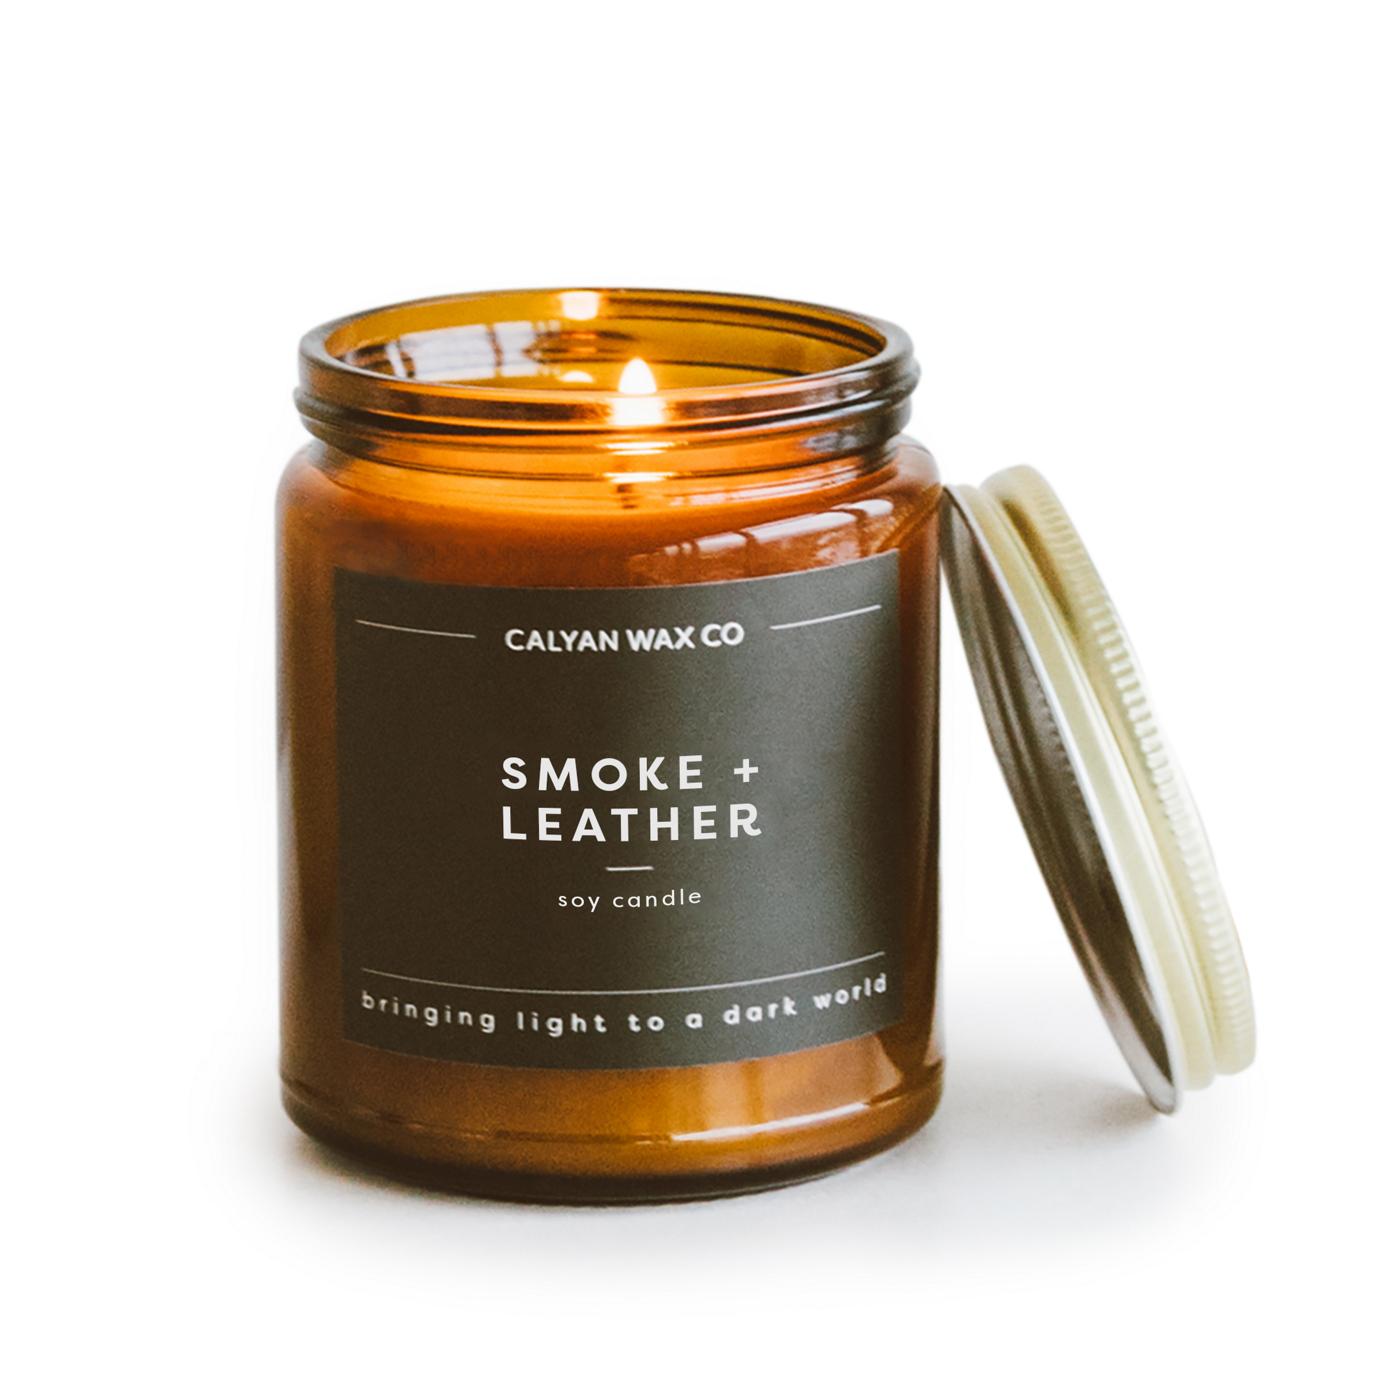 Calyan Wax Co. Smoke + Leather Scented Soy Candle; image 2 of 3